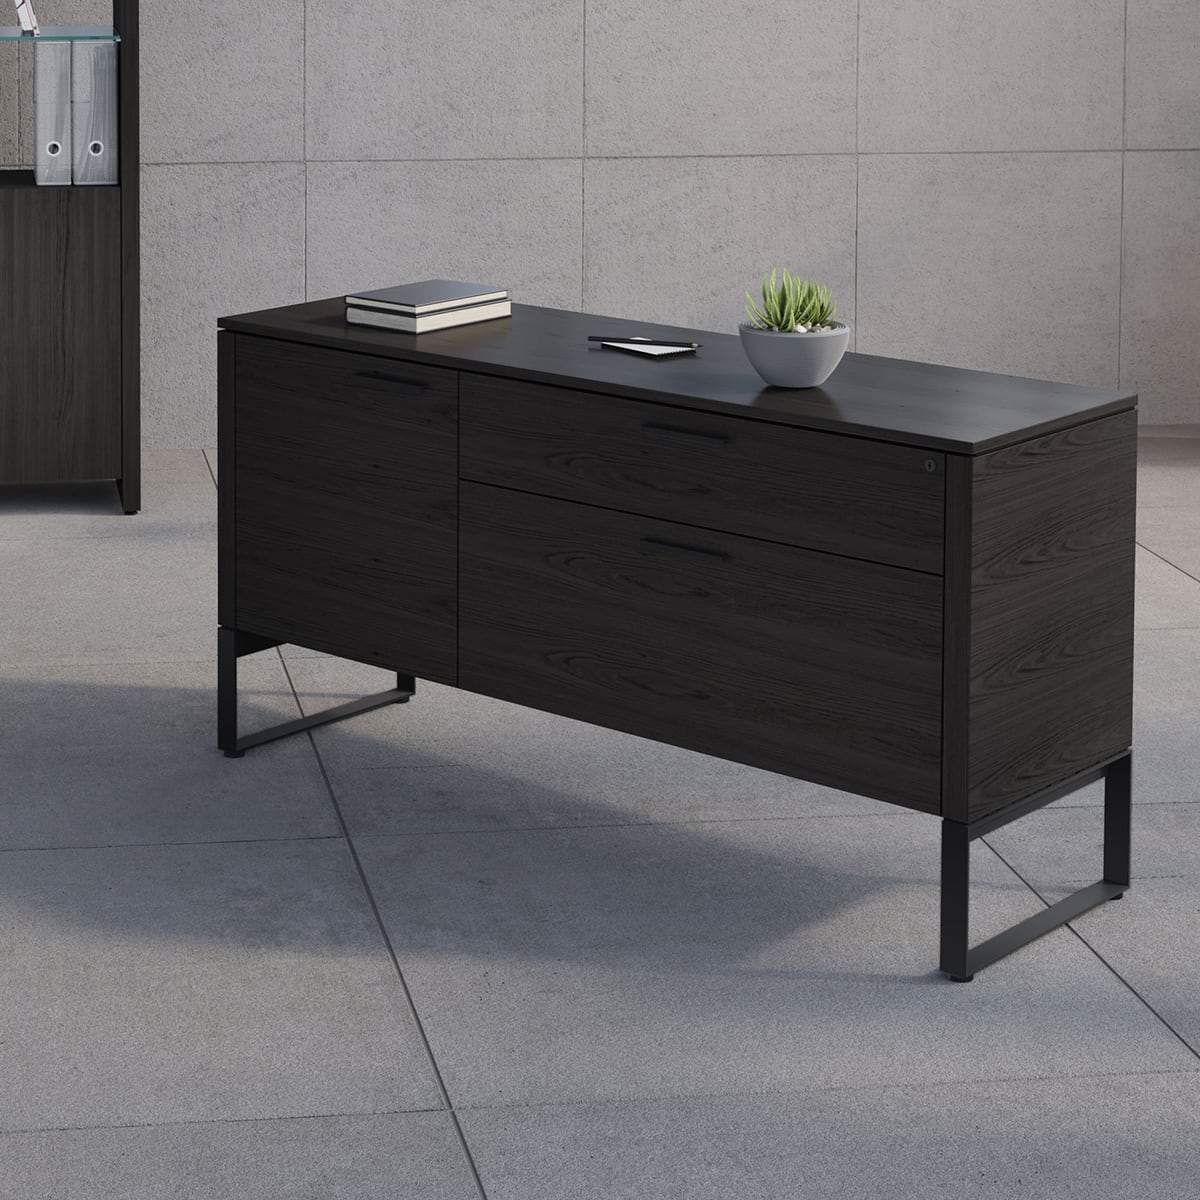 BDI Linea 6220 Multifunction Cabinet (Charcoal Stained Ash)